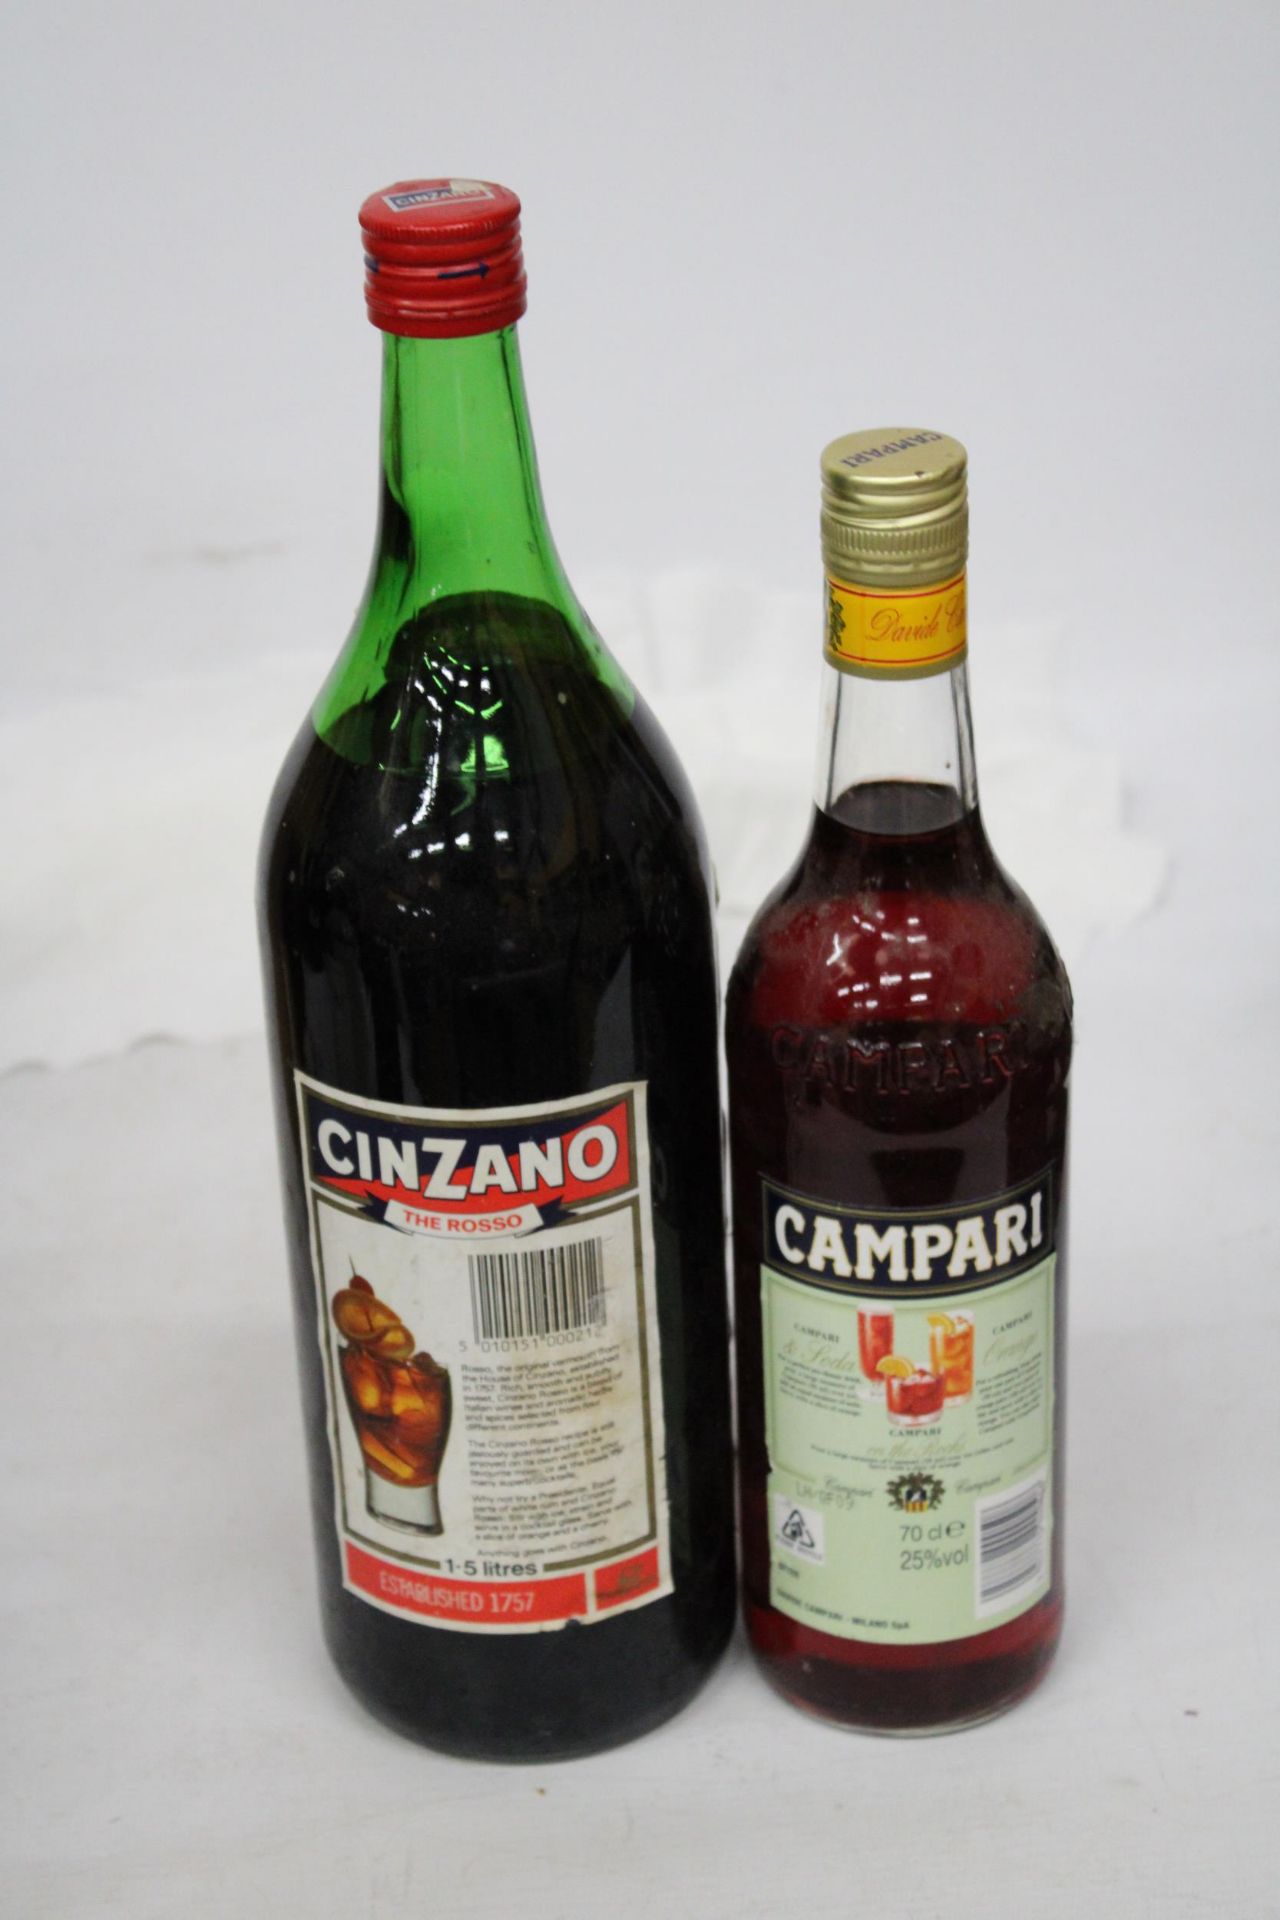 A 1.5 LITRE BOTTLE OF CINZANO ROSSO VERMOUTH TOGETHER WITH A BOTTLE OF CAMPARI - Image 2 of 2